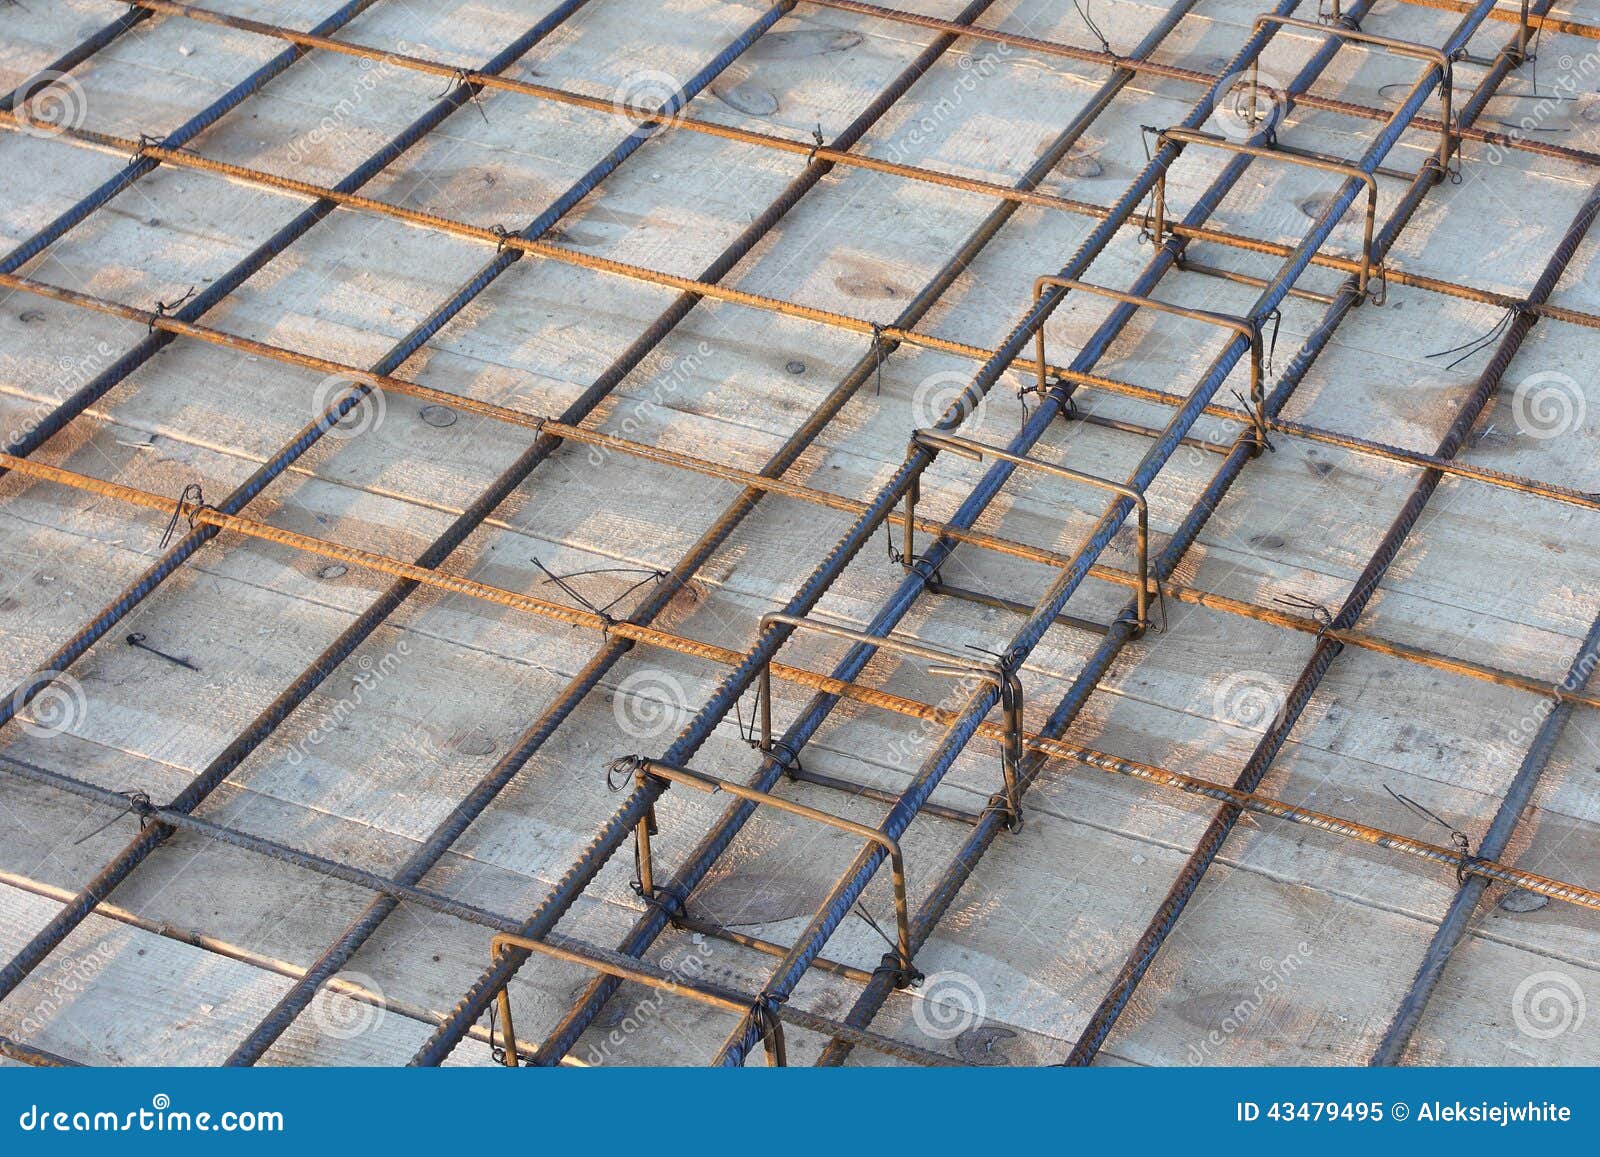 3 586 Slab Reinforcement Photos Free Royalty Free Stock Photos From Dreamstime